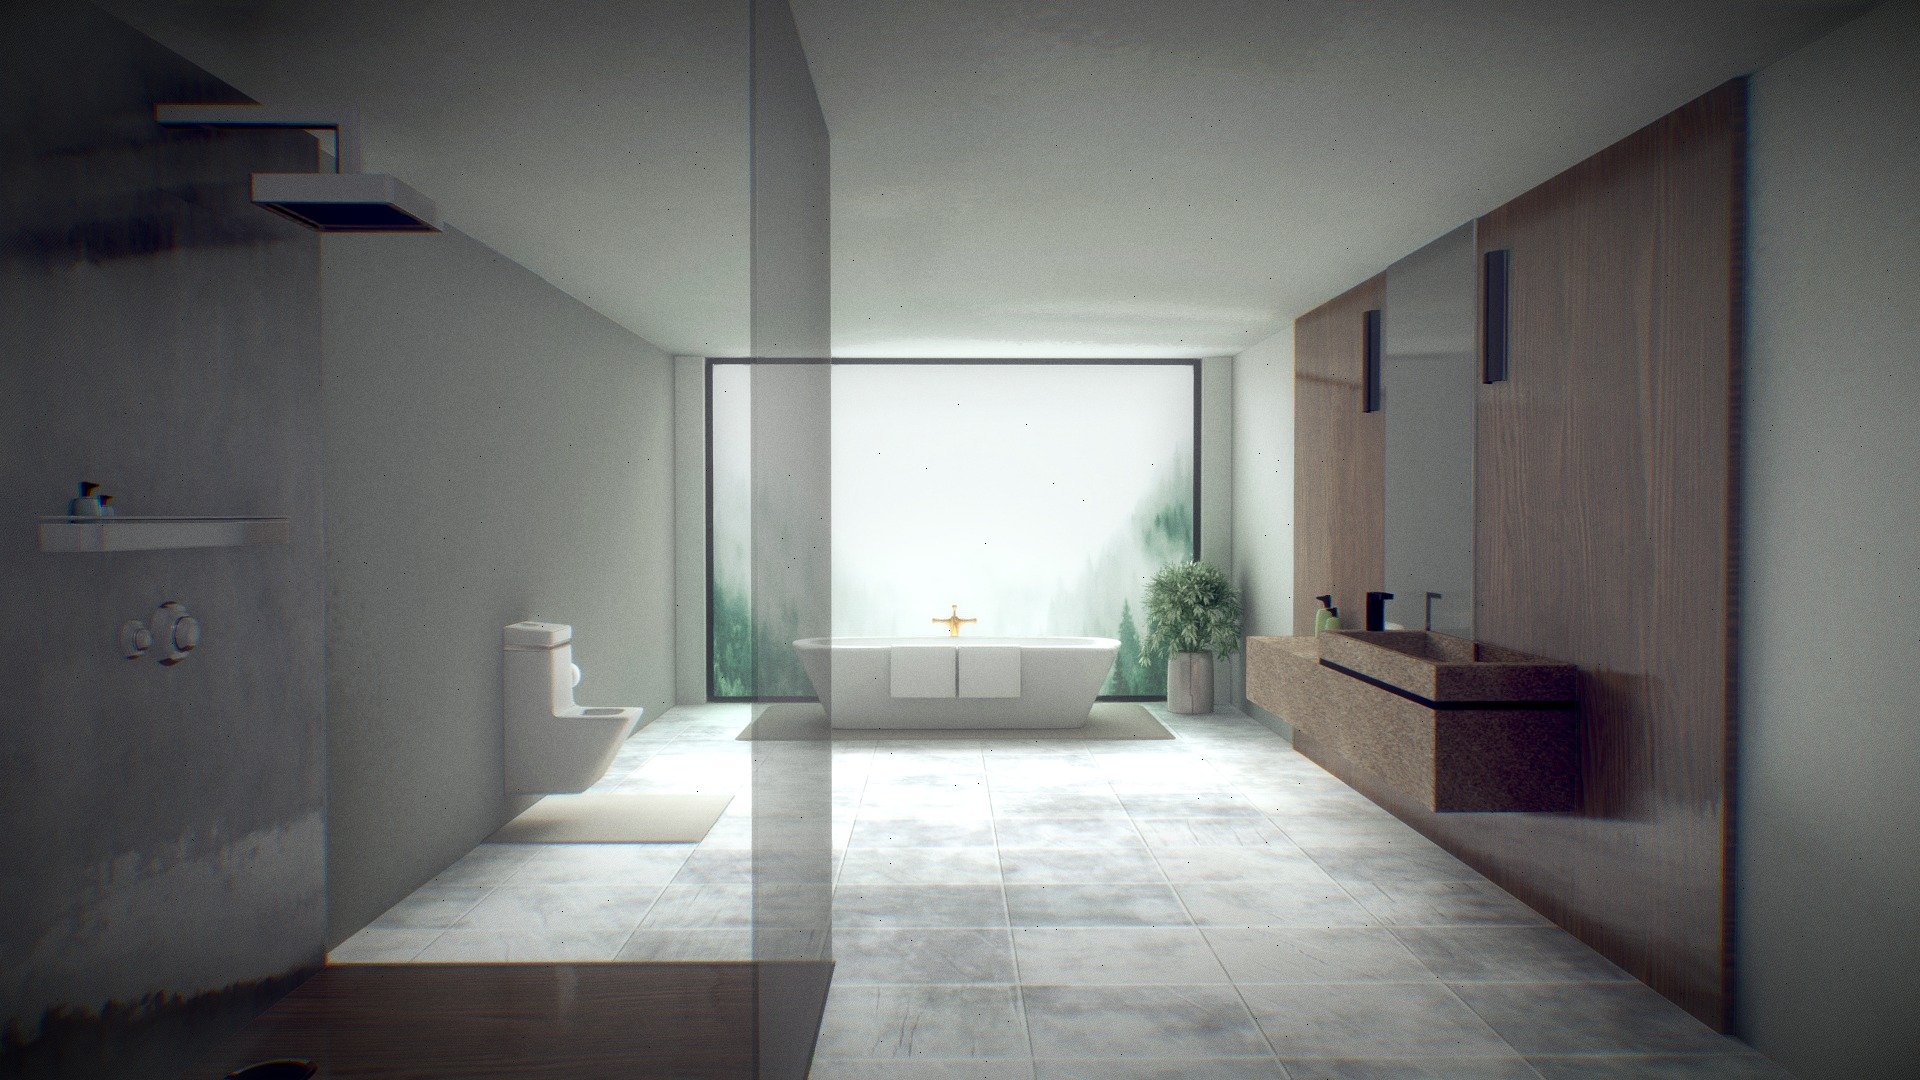 Clean white modern bathroom which I made during my spare time. 

Quite enjoyed making this one.

All the textures are baked :) - Modern Bathroom - Download Free 3D model by dylanheyes 3d model